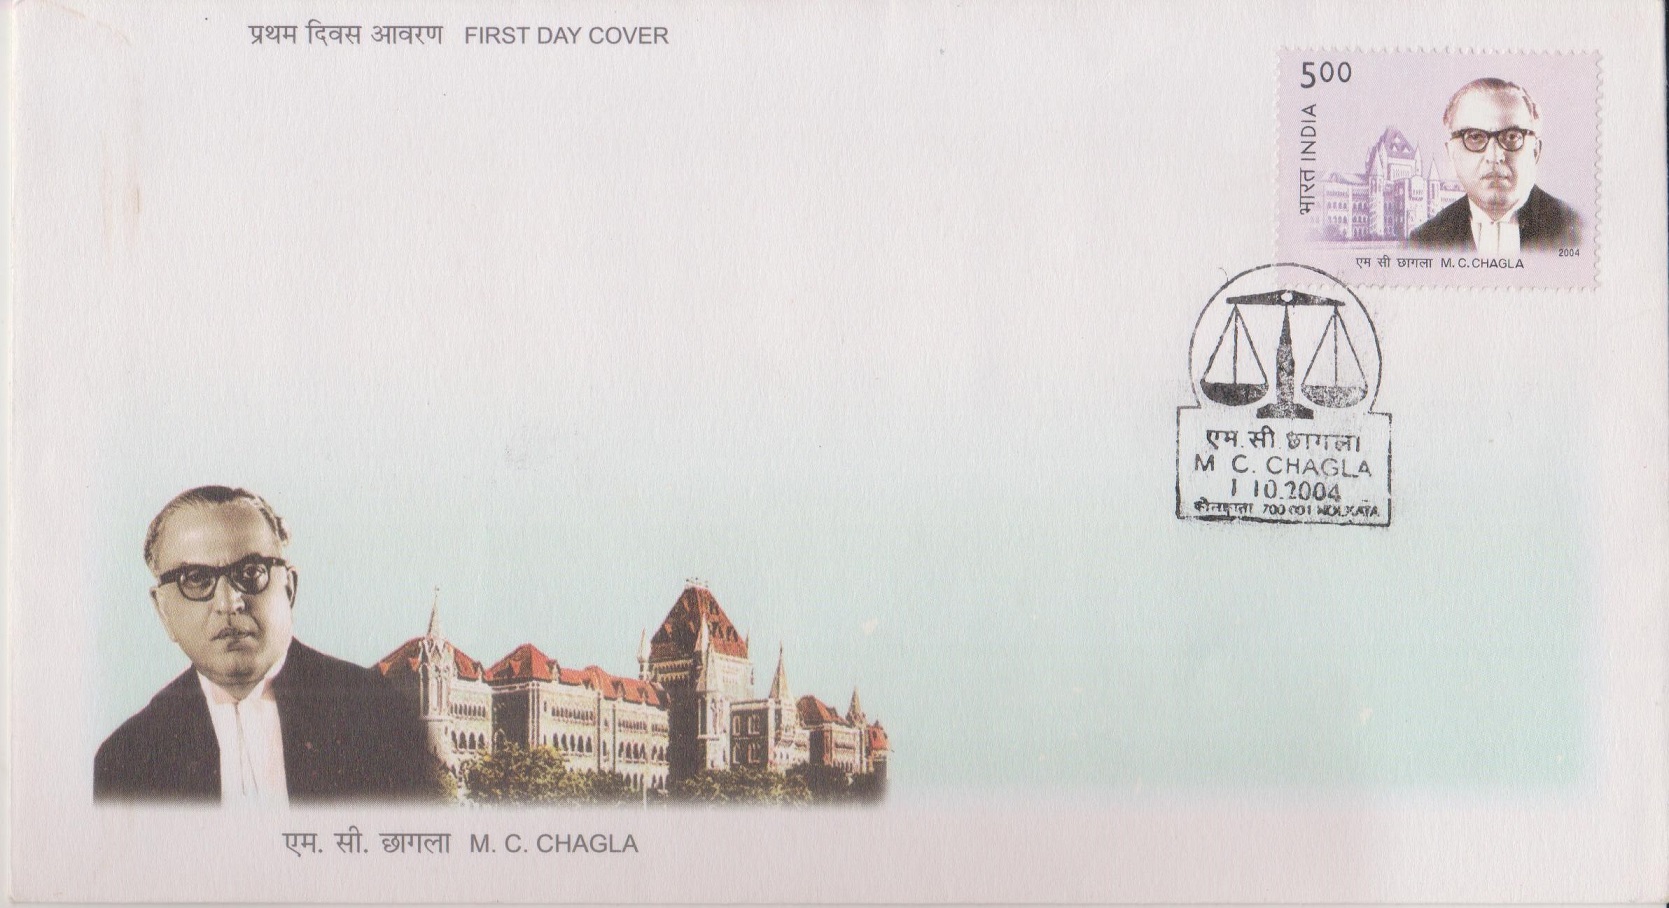 Chief Justice of the Bombay High Court